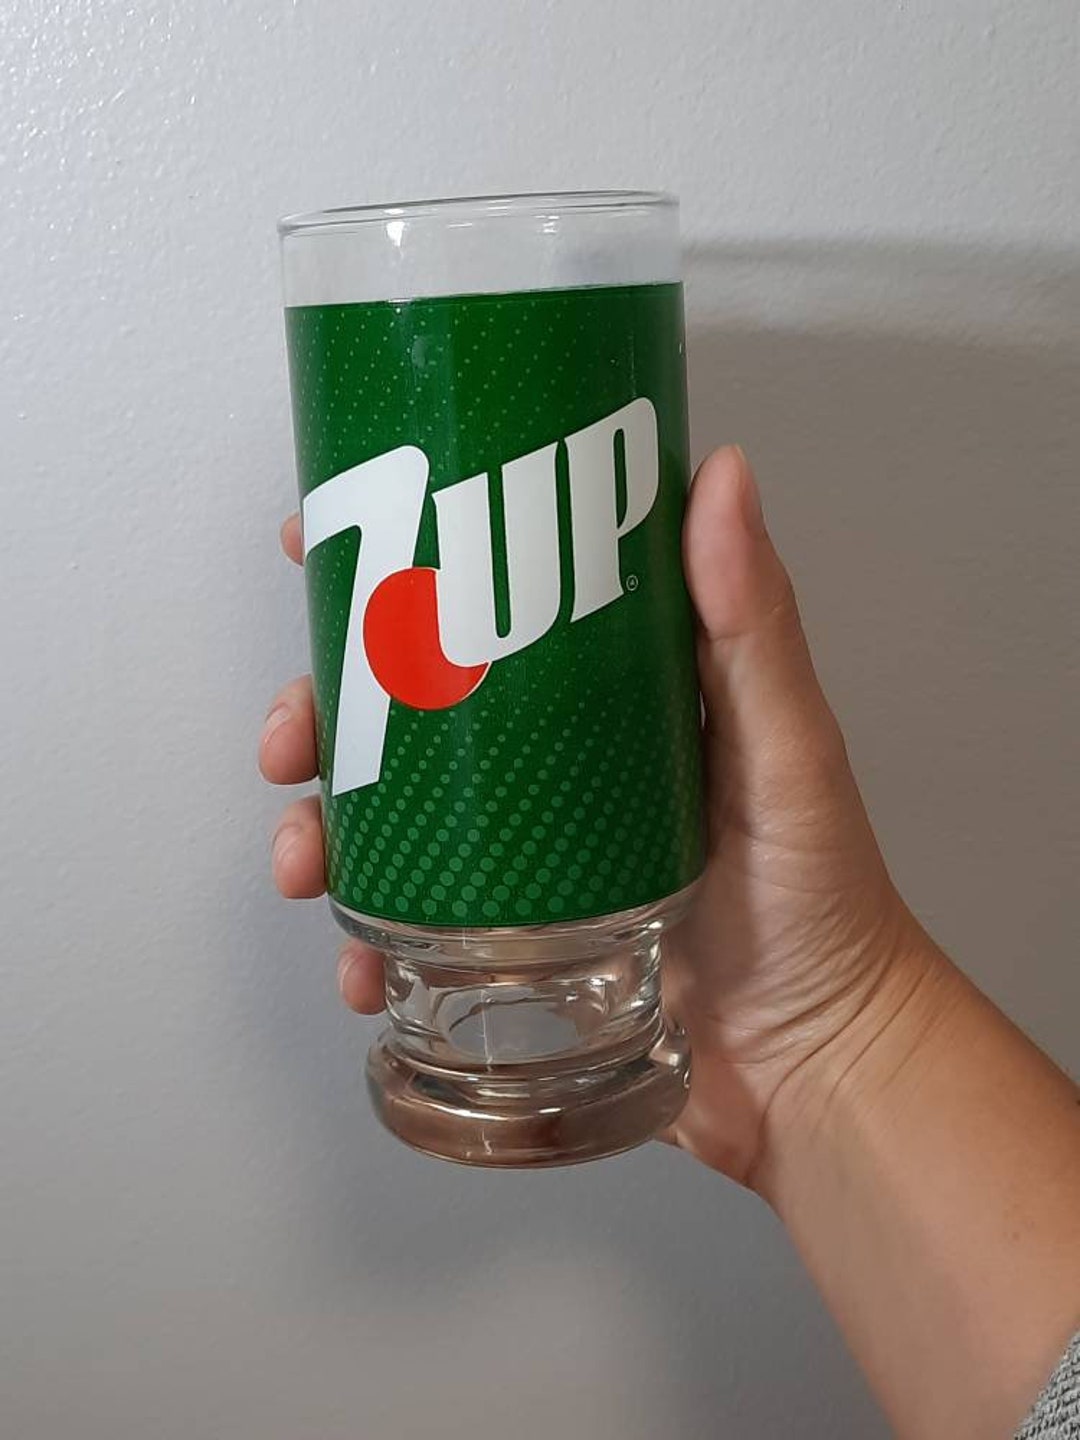 Vintage 90s 7up FIDO DIDO Surfer Character Promo Drinking Glass Pepsico  Rare Early 90s Mascot Collectible Advertising Tumbler Glassware 